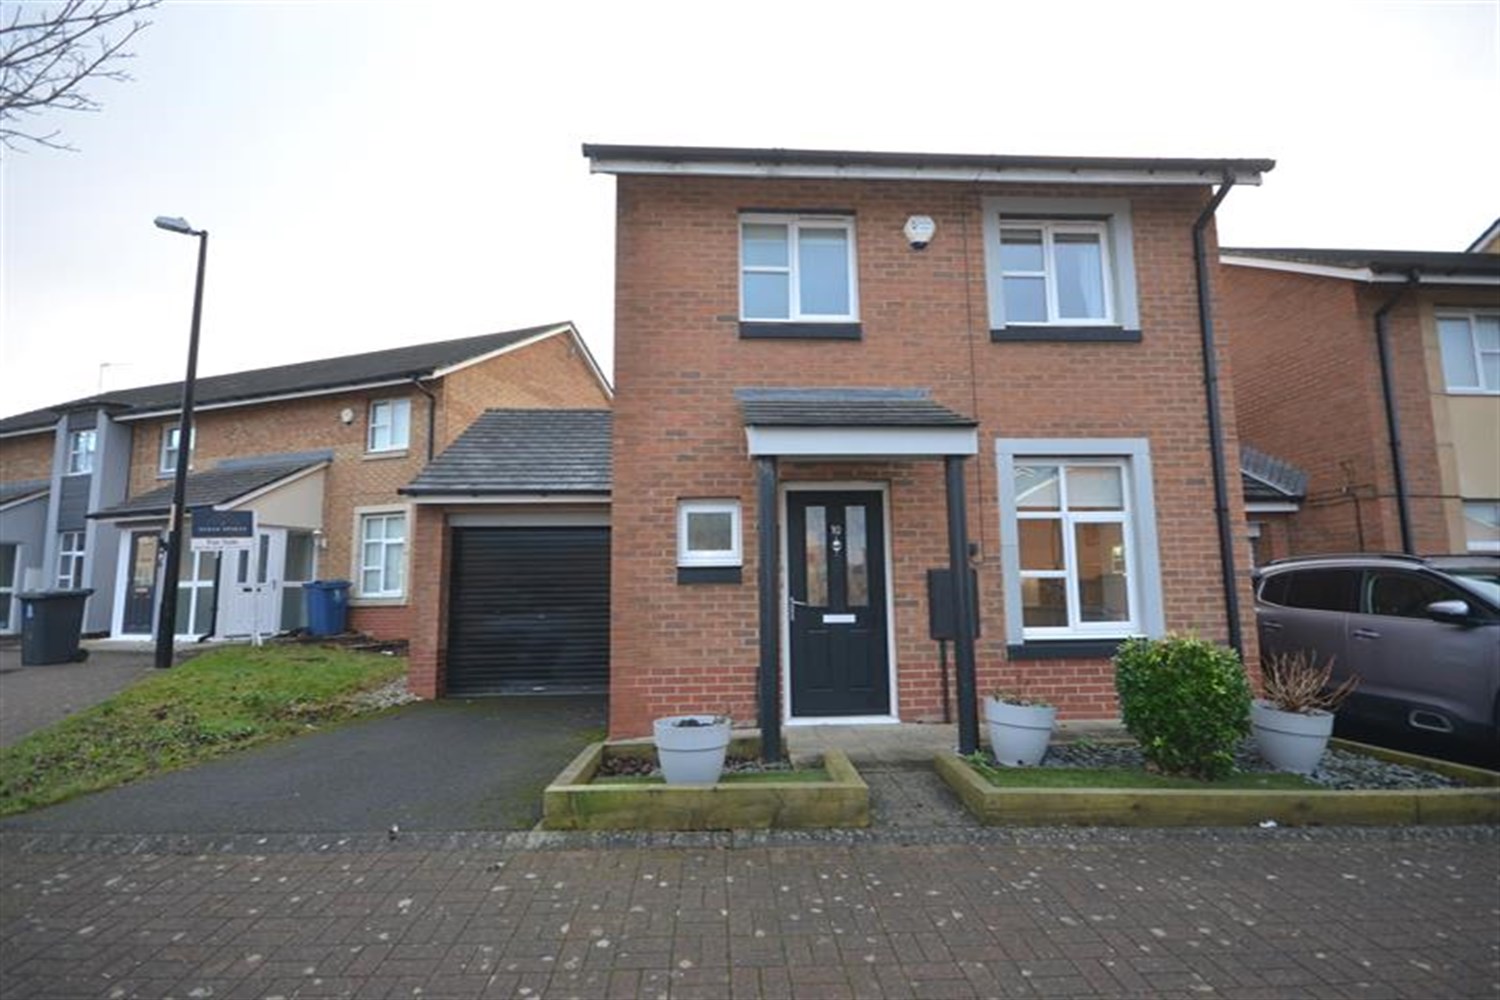 3 bed link detached house for sale in Snowberry Grove, South Shields - Property Image 1